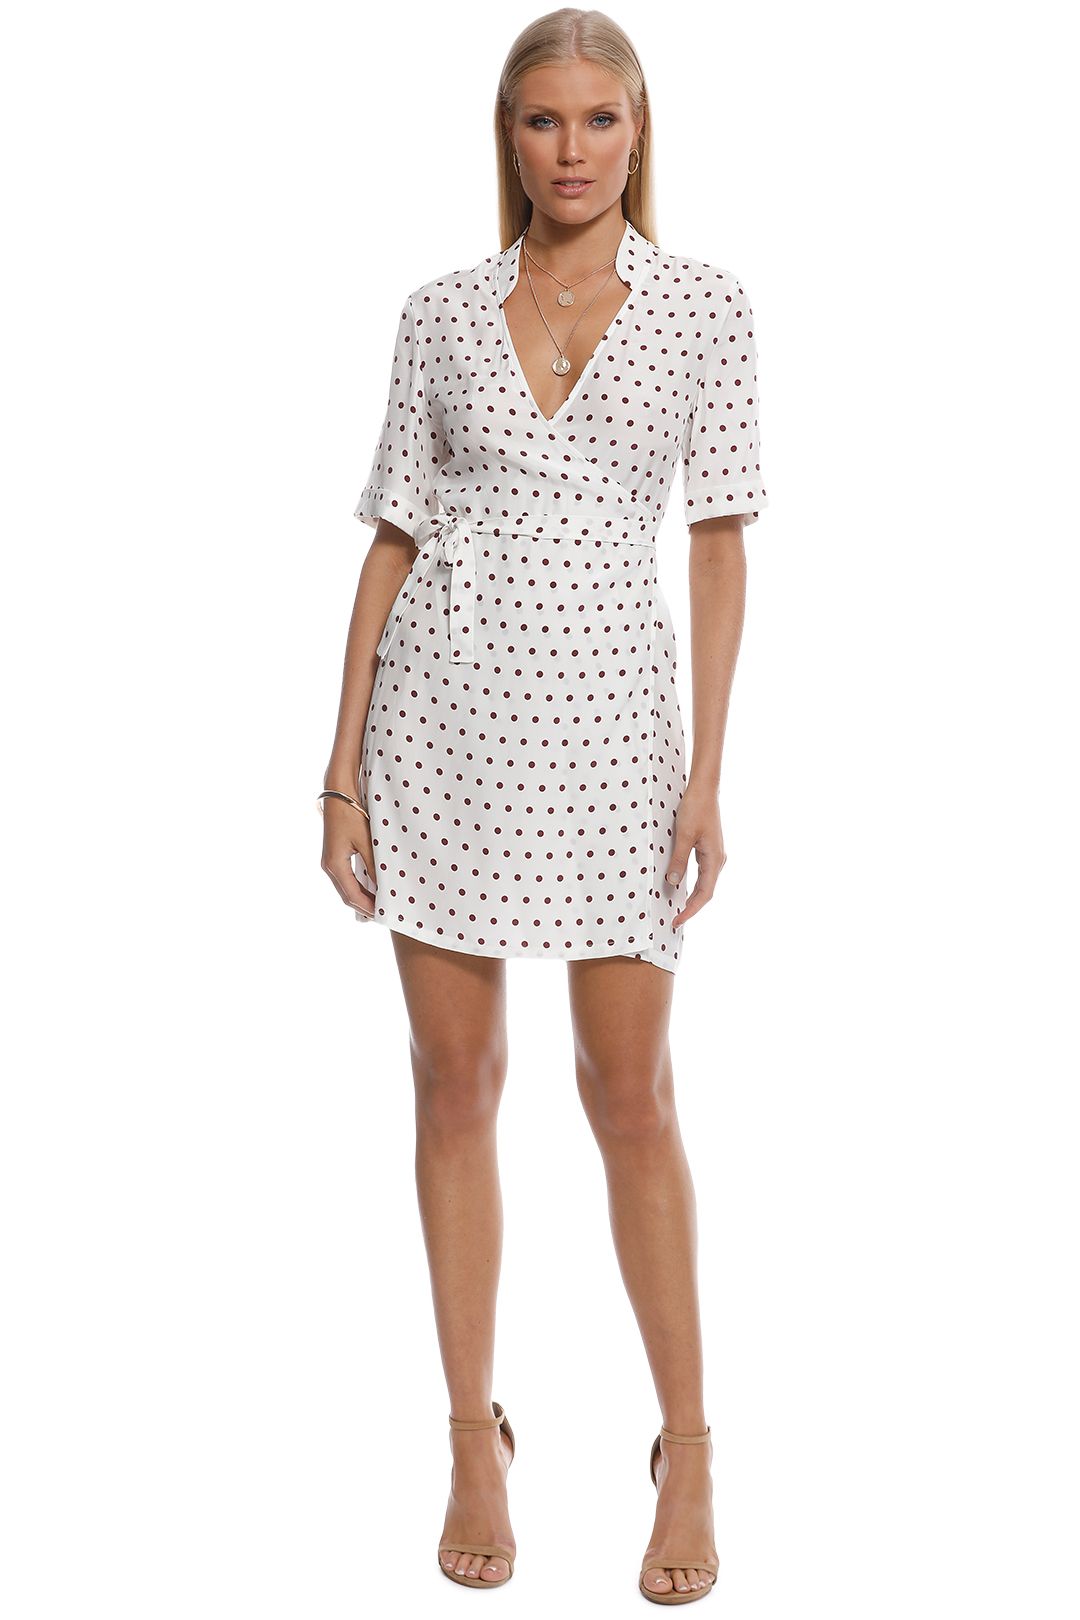 SIR the Label - Luca Wrap Dress - White Polka - Front